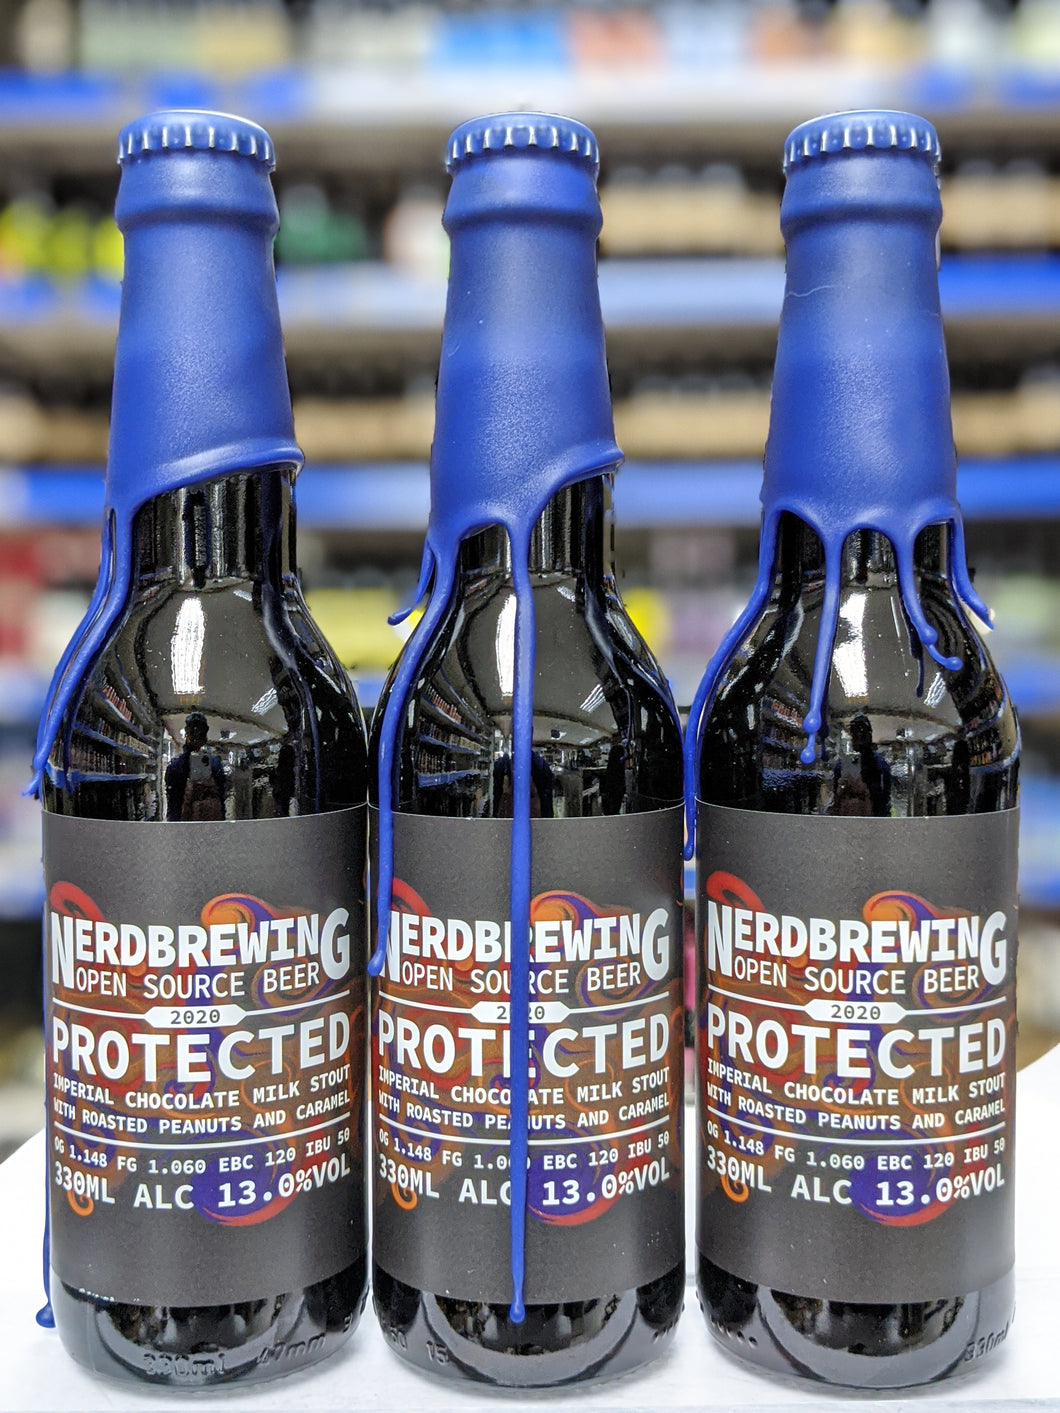 Projected 2020 - Nerd Brewing - Imperial Chocolate Milk Stout with Roasted Peanuts & Caramel, 13%, 330ml Bottle